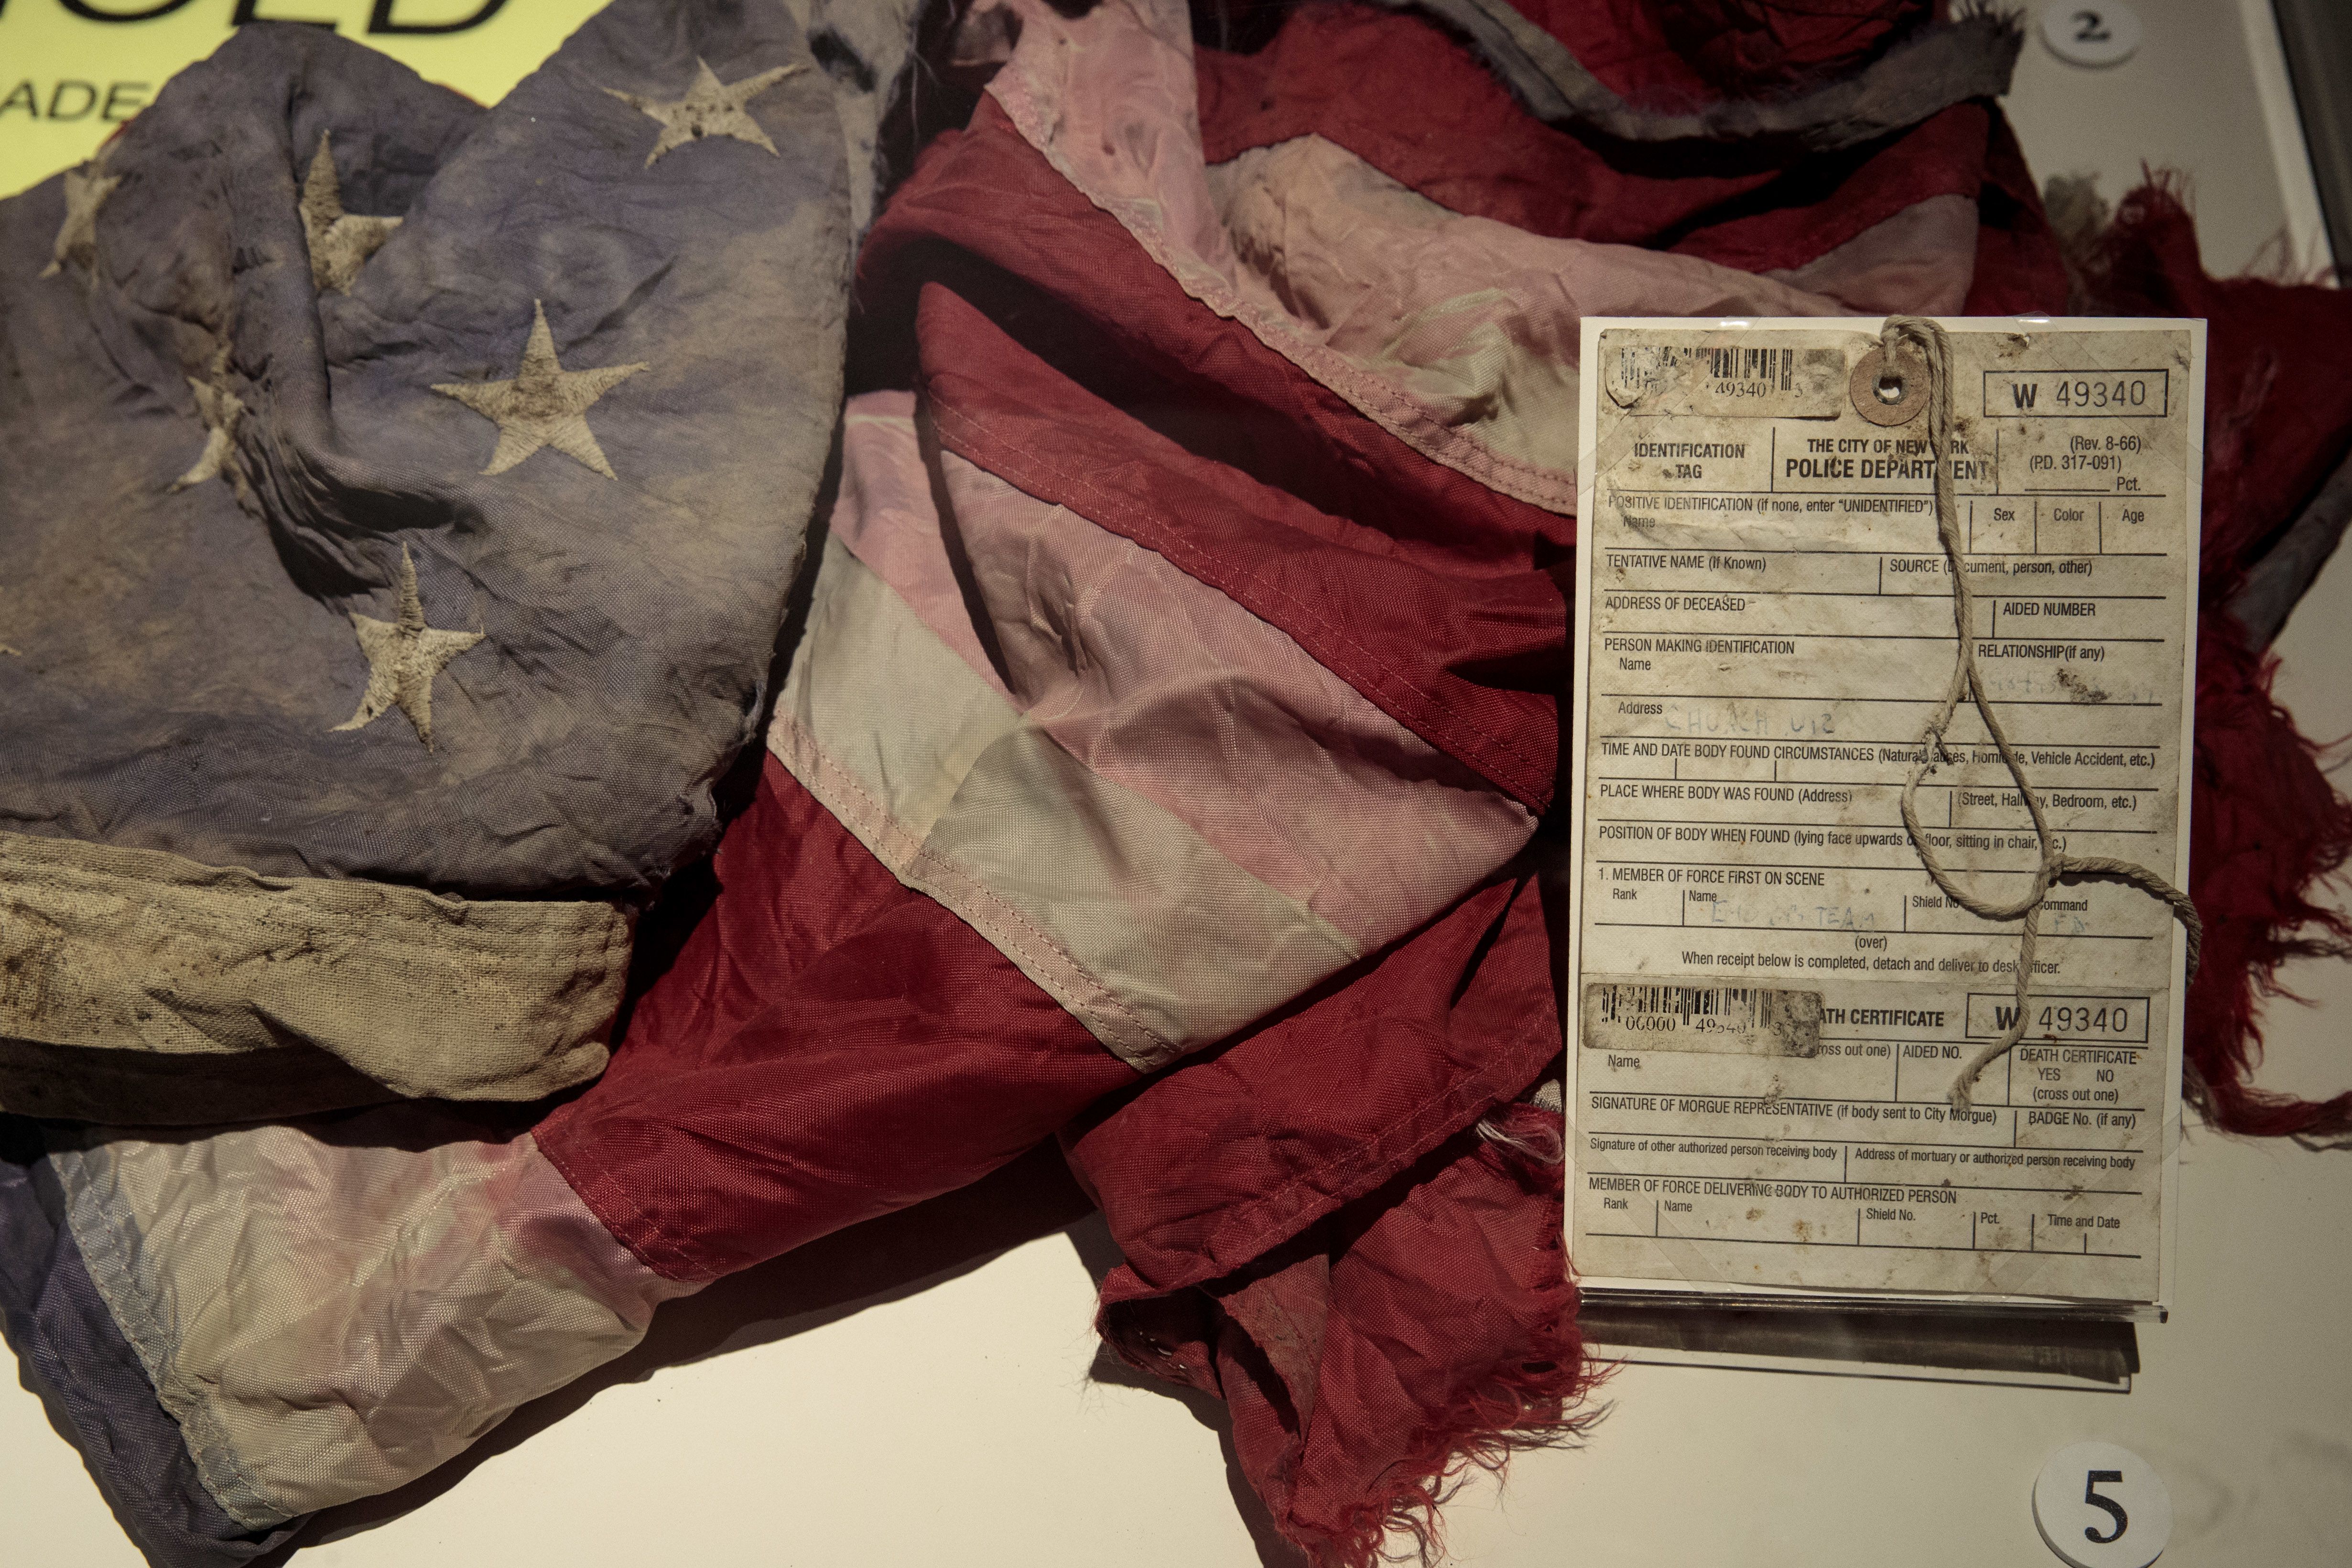 NEW YORK, NY - JUNE 13:  A New York City Police Department death certificate and an American flag recovered at Ground Zero are displayed at new 9/11 Tribute Museum, June 13, 2017 in New York City. The new 9/11 Tribute Museum is officially opening today in an expanded location. The museum shares the personal stories of those directly impacted by the September 11, 2001 terrorist attacks on the World Trade Center. (Photo by Drew Angerer/Getty Images)